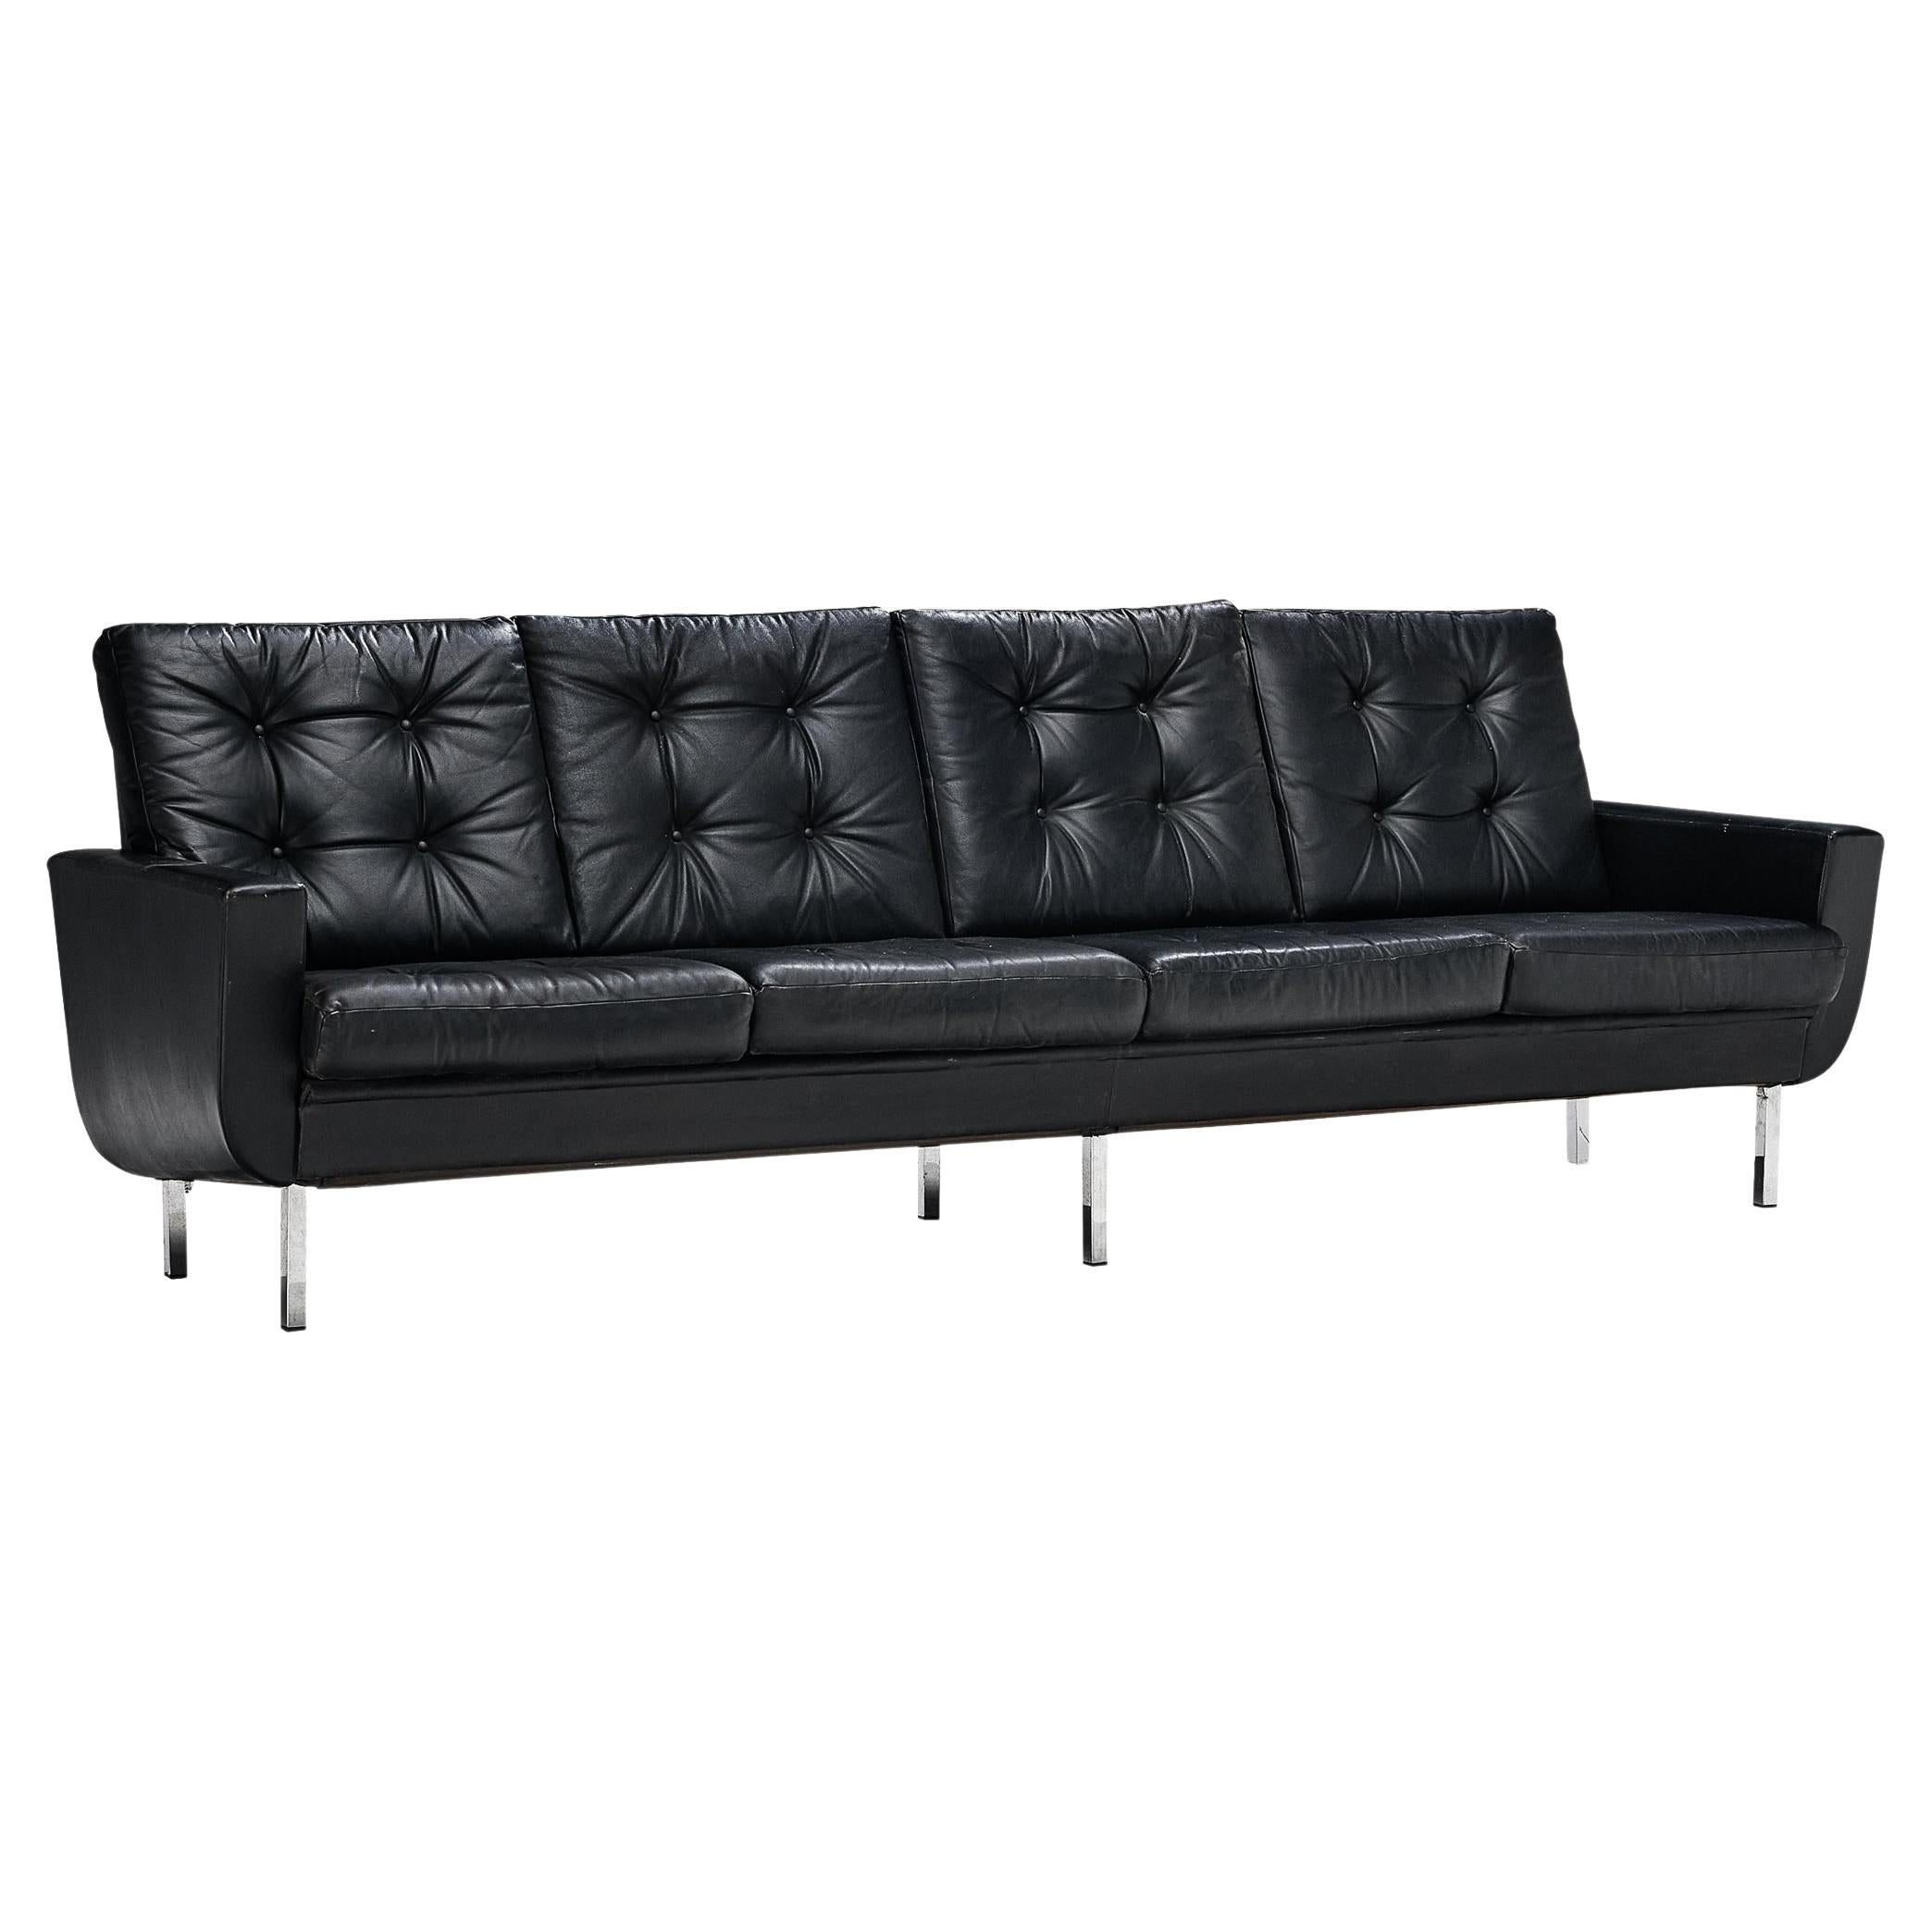 Four-Seater Sofa in Black Leatherette and Steel For Sale